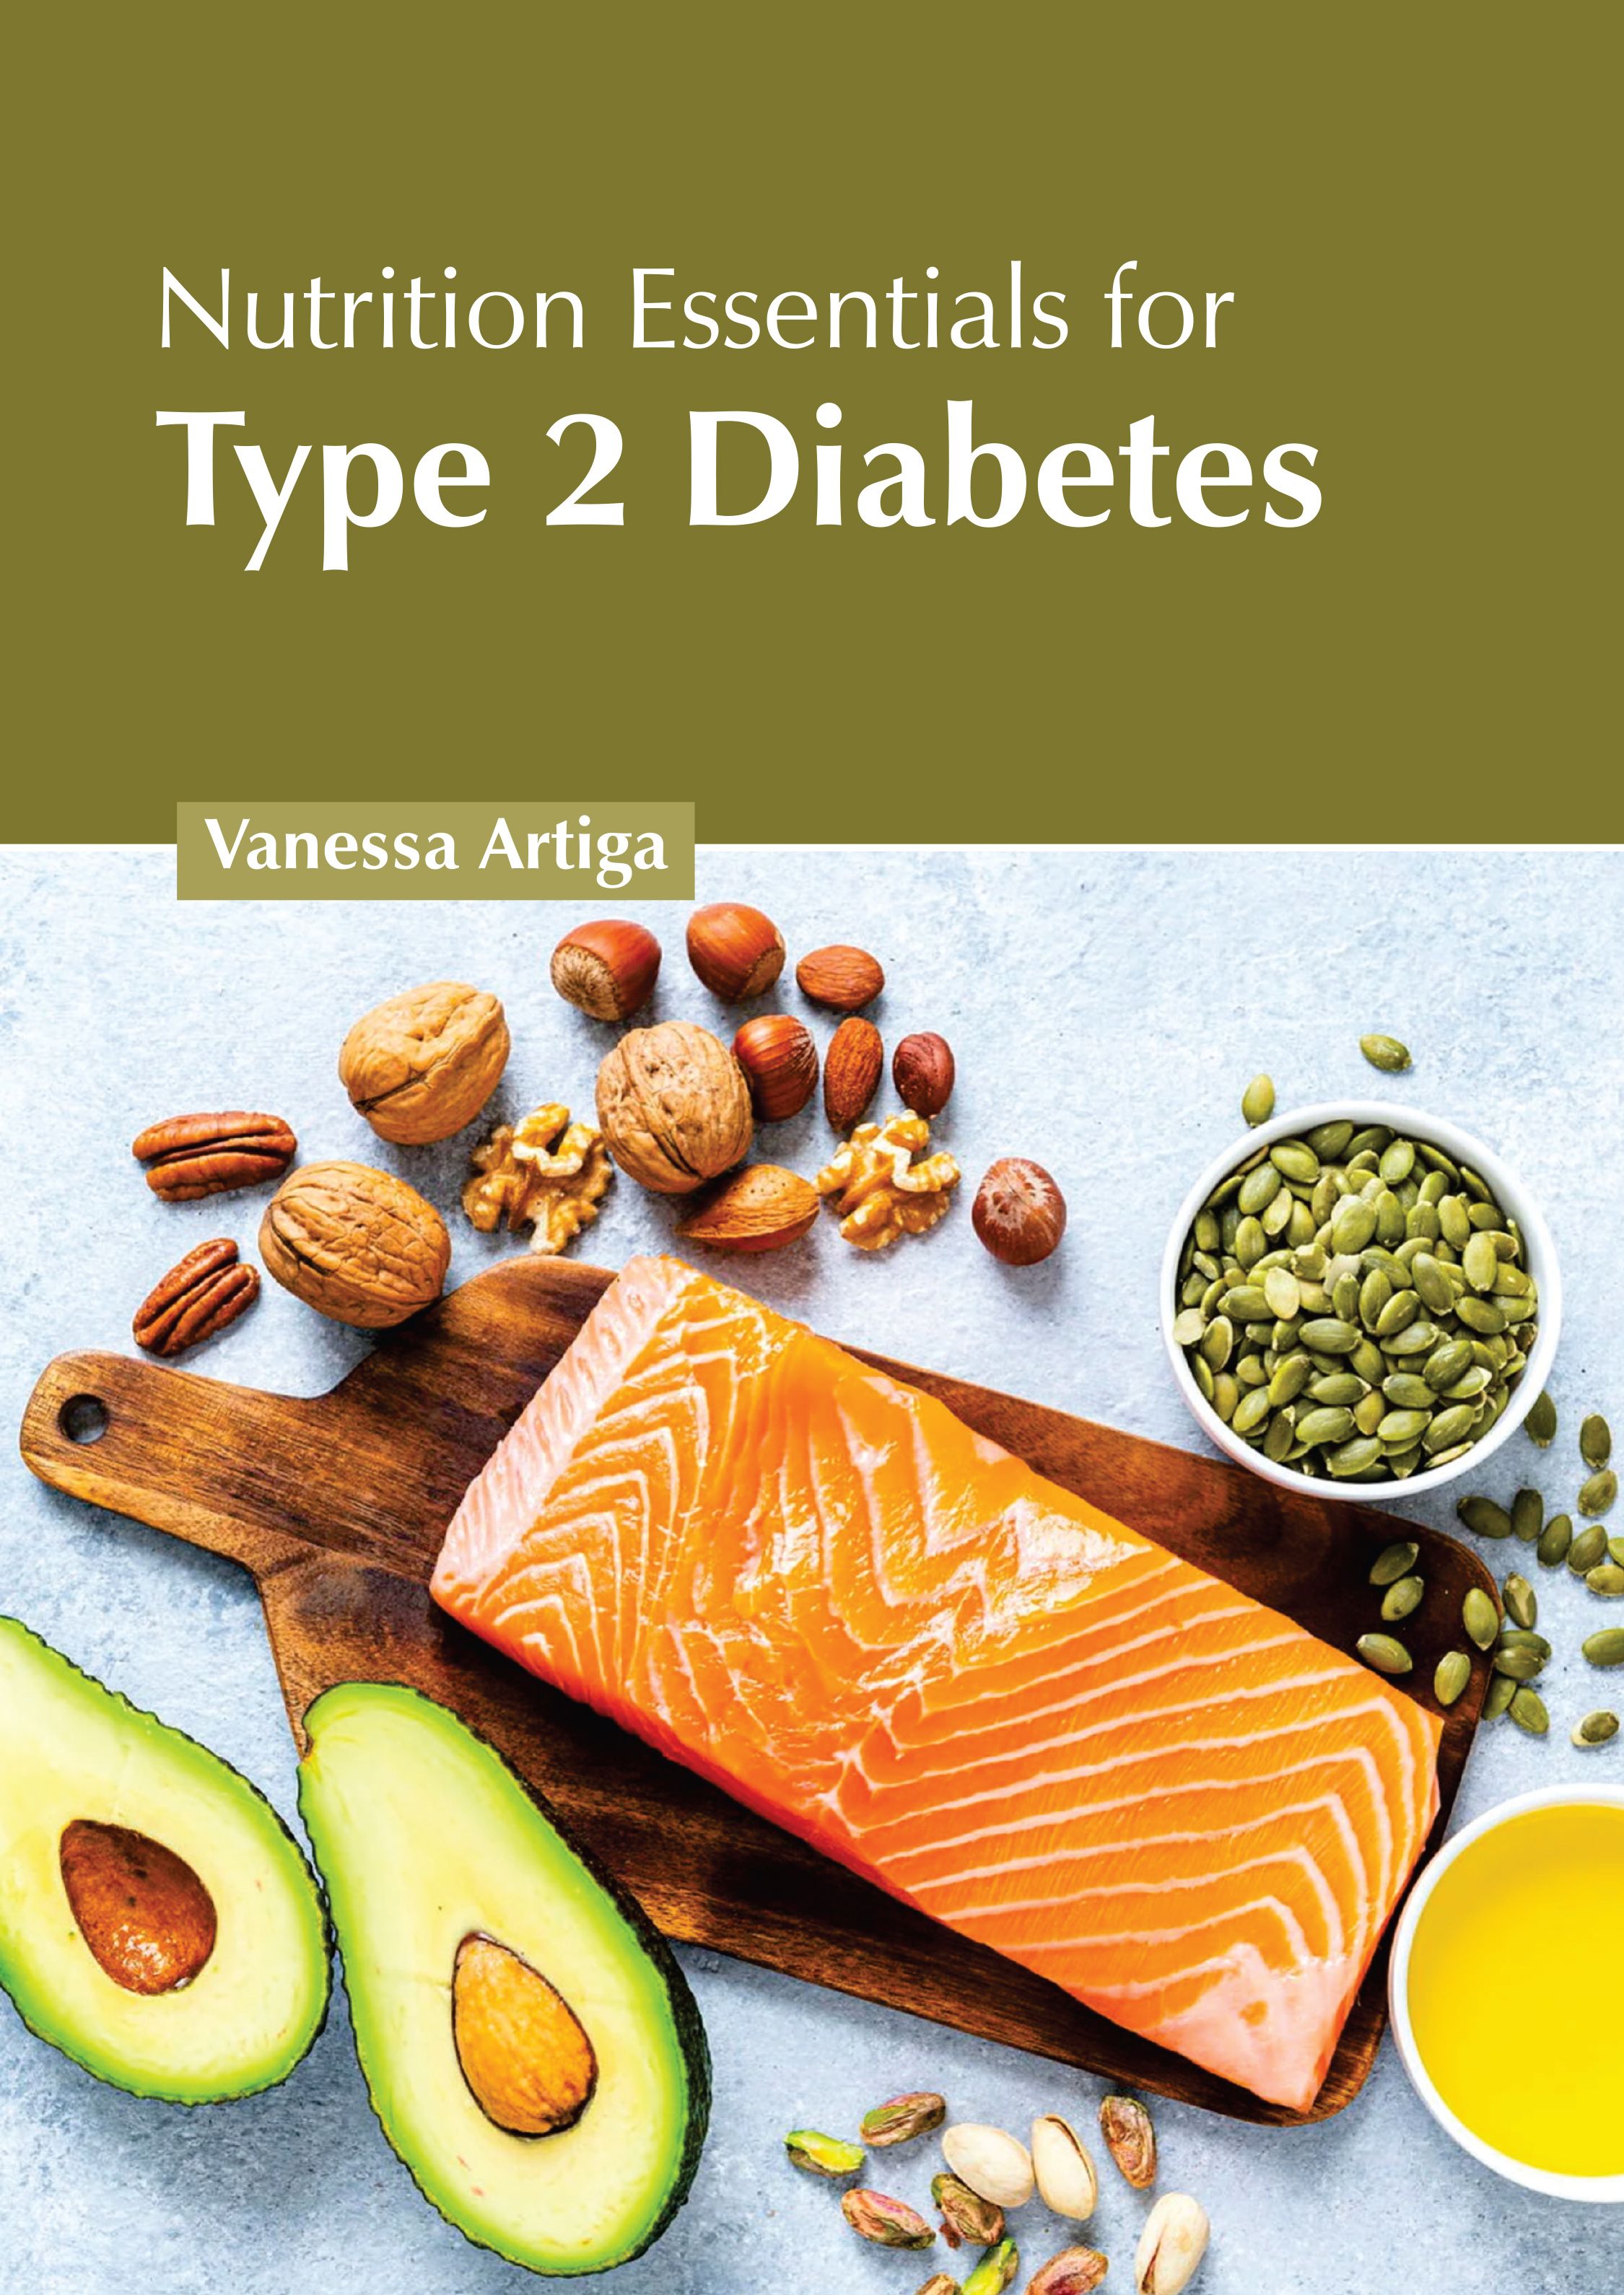 

exclusive-publishers/american-medical-publishers/nutrition-essentials-for-type-2-diabetes-9781639277605